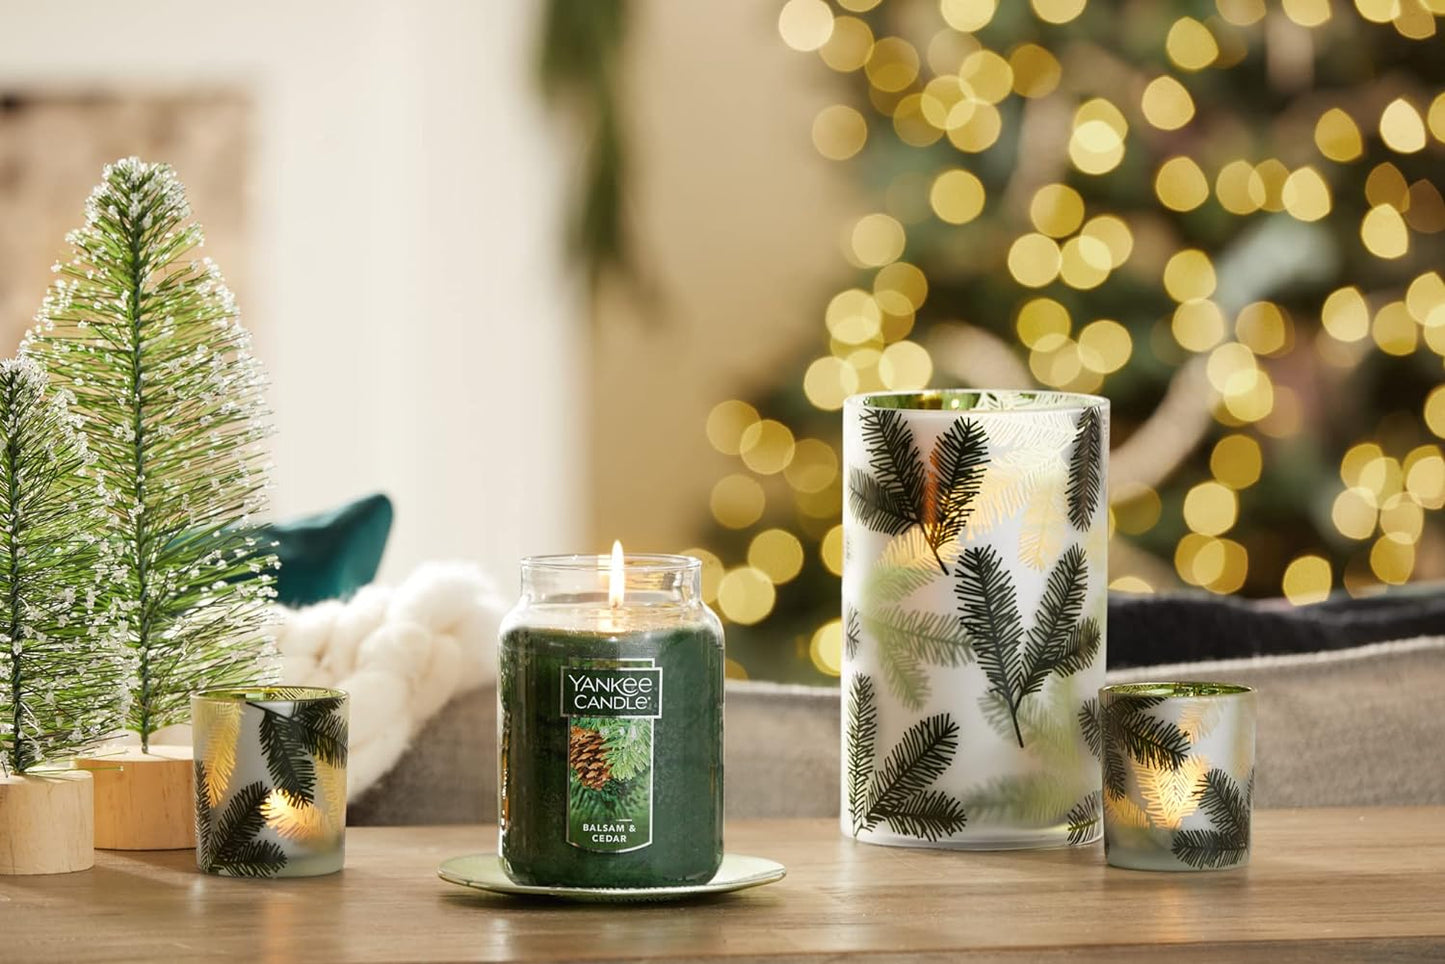 Balsam & Cedar Scented, Classic 22Oz Large Jar Single Wick Candle, over 110 Hours of Burn Time | Holiday Gifts for All